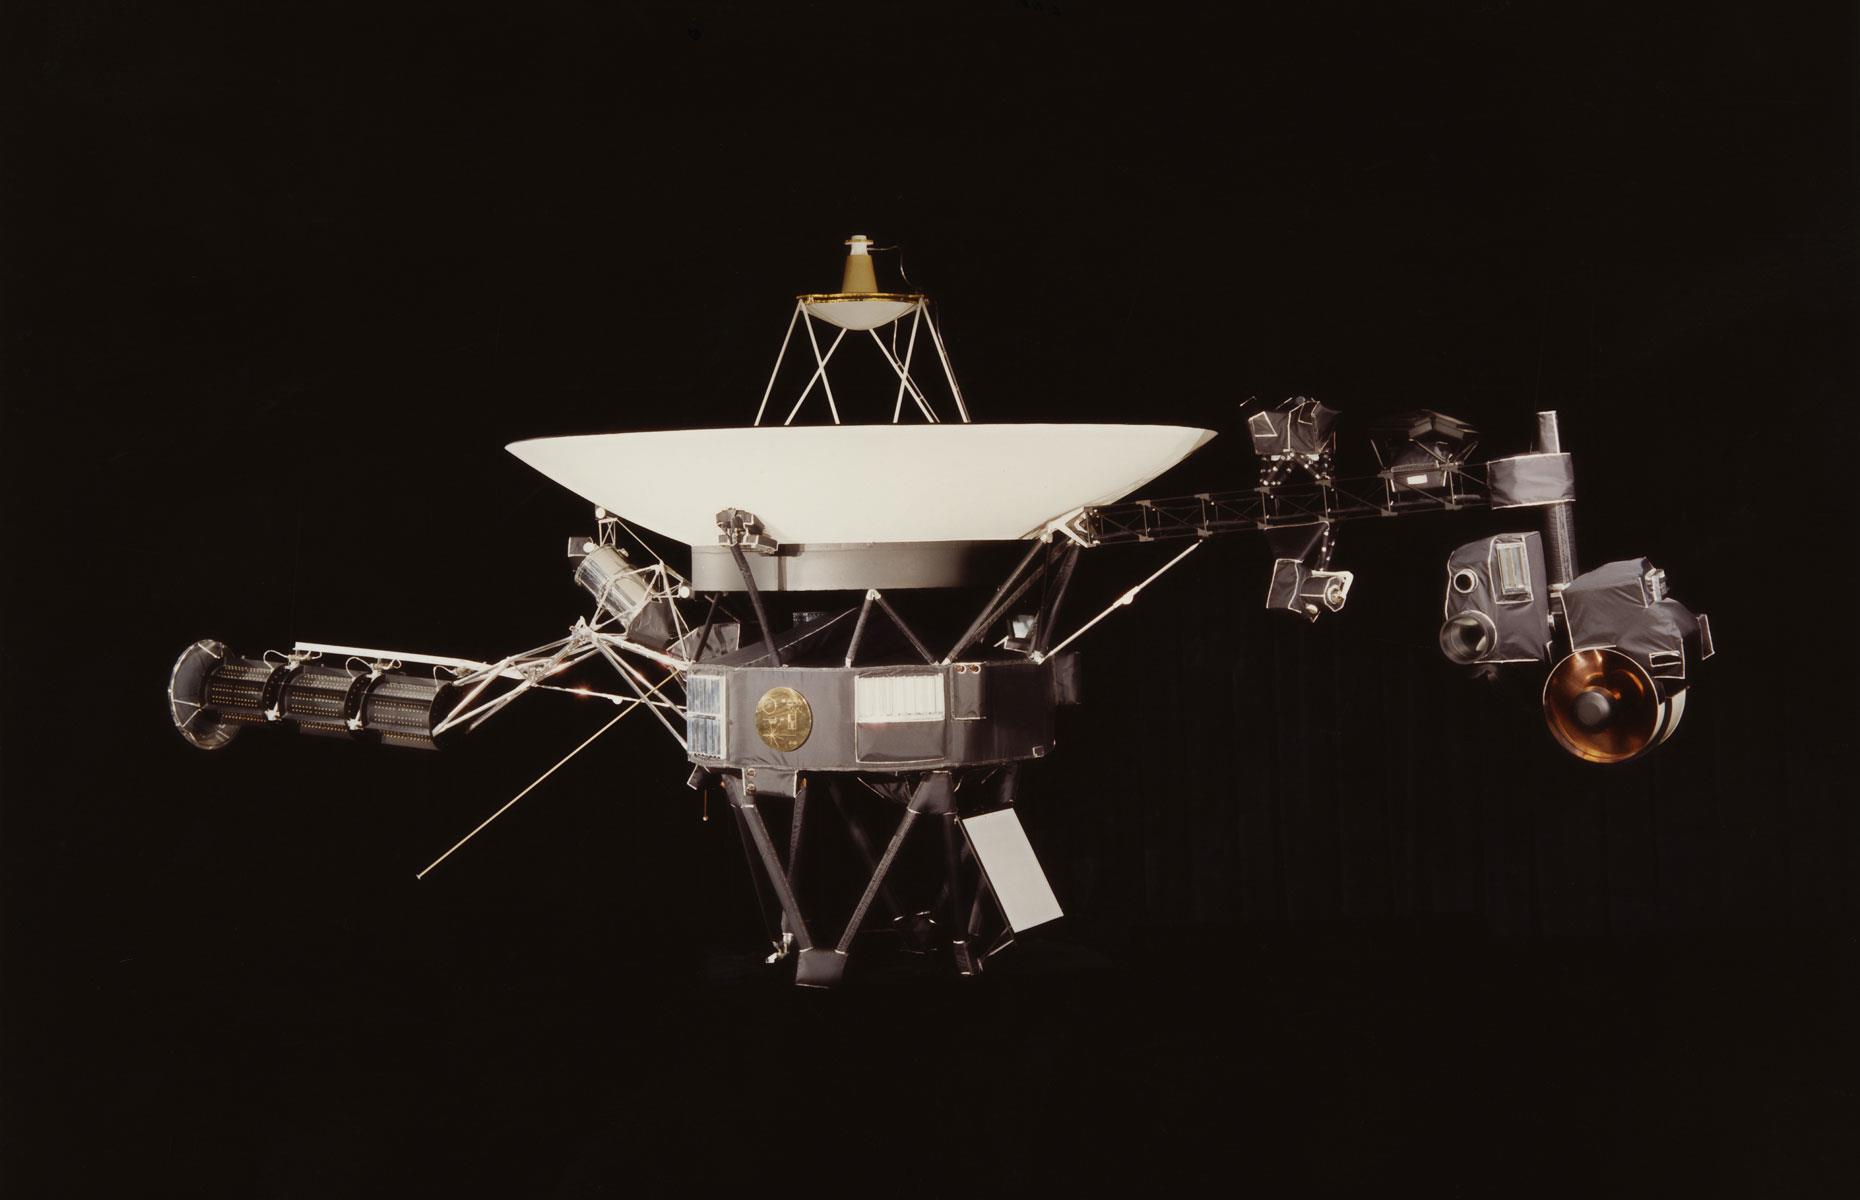 <p>The most distant object built by humans, Voyager 1 was launched on 5 September 1977 and made it to interstellar space on 25 August 2012. Like its twin, Voyager 1 is poised to wander the Milky Way, whizzing by the star Gliese 445 in about 40,000 years from now. </p>  <p><strong>Now read <a href="https://www.lovemoney.com/galleries/53304/the-surprising-truth-about-how-much-nasa-costs?page=1">the surprising truth about how much NASA costs</a></strong></p>